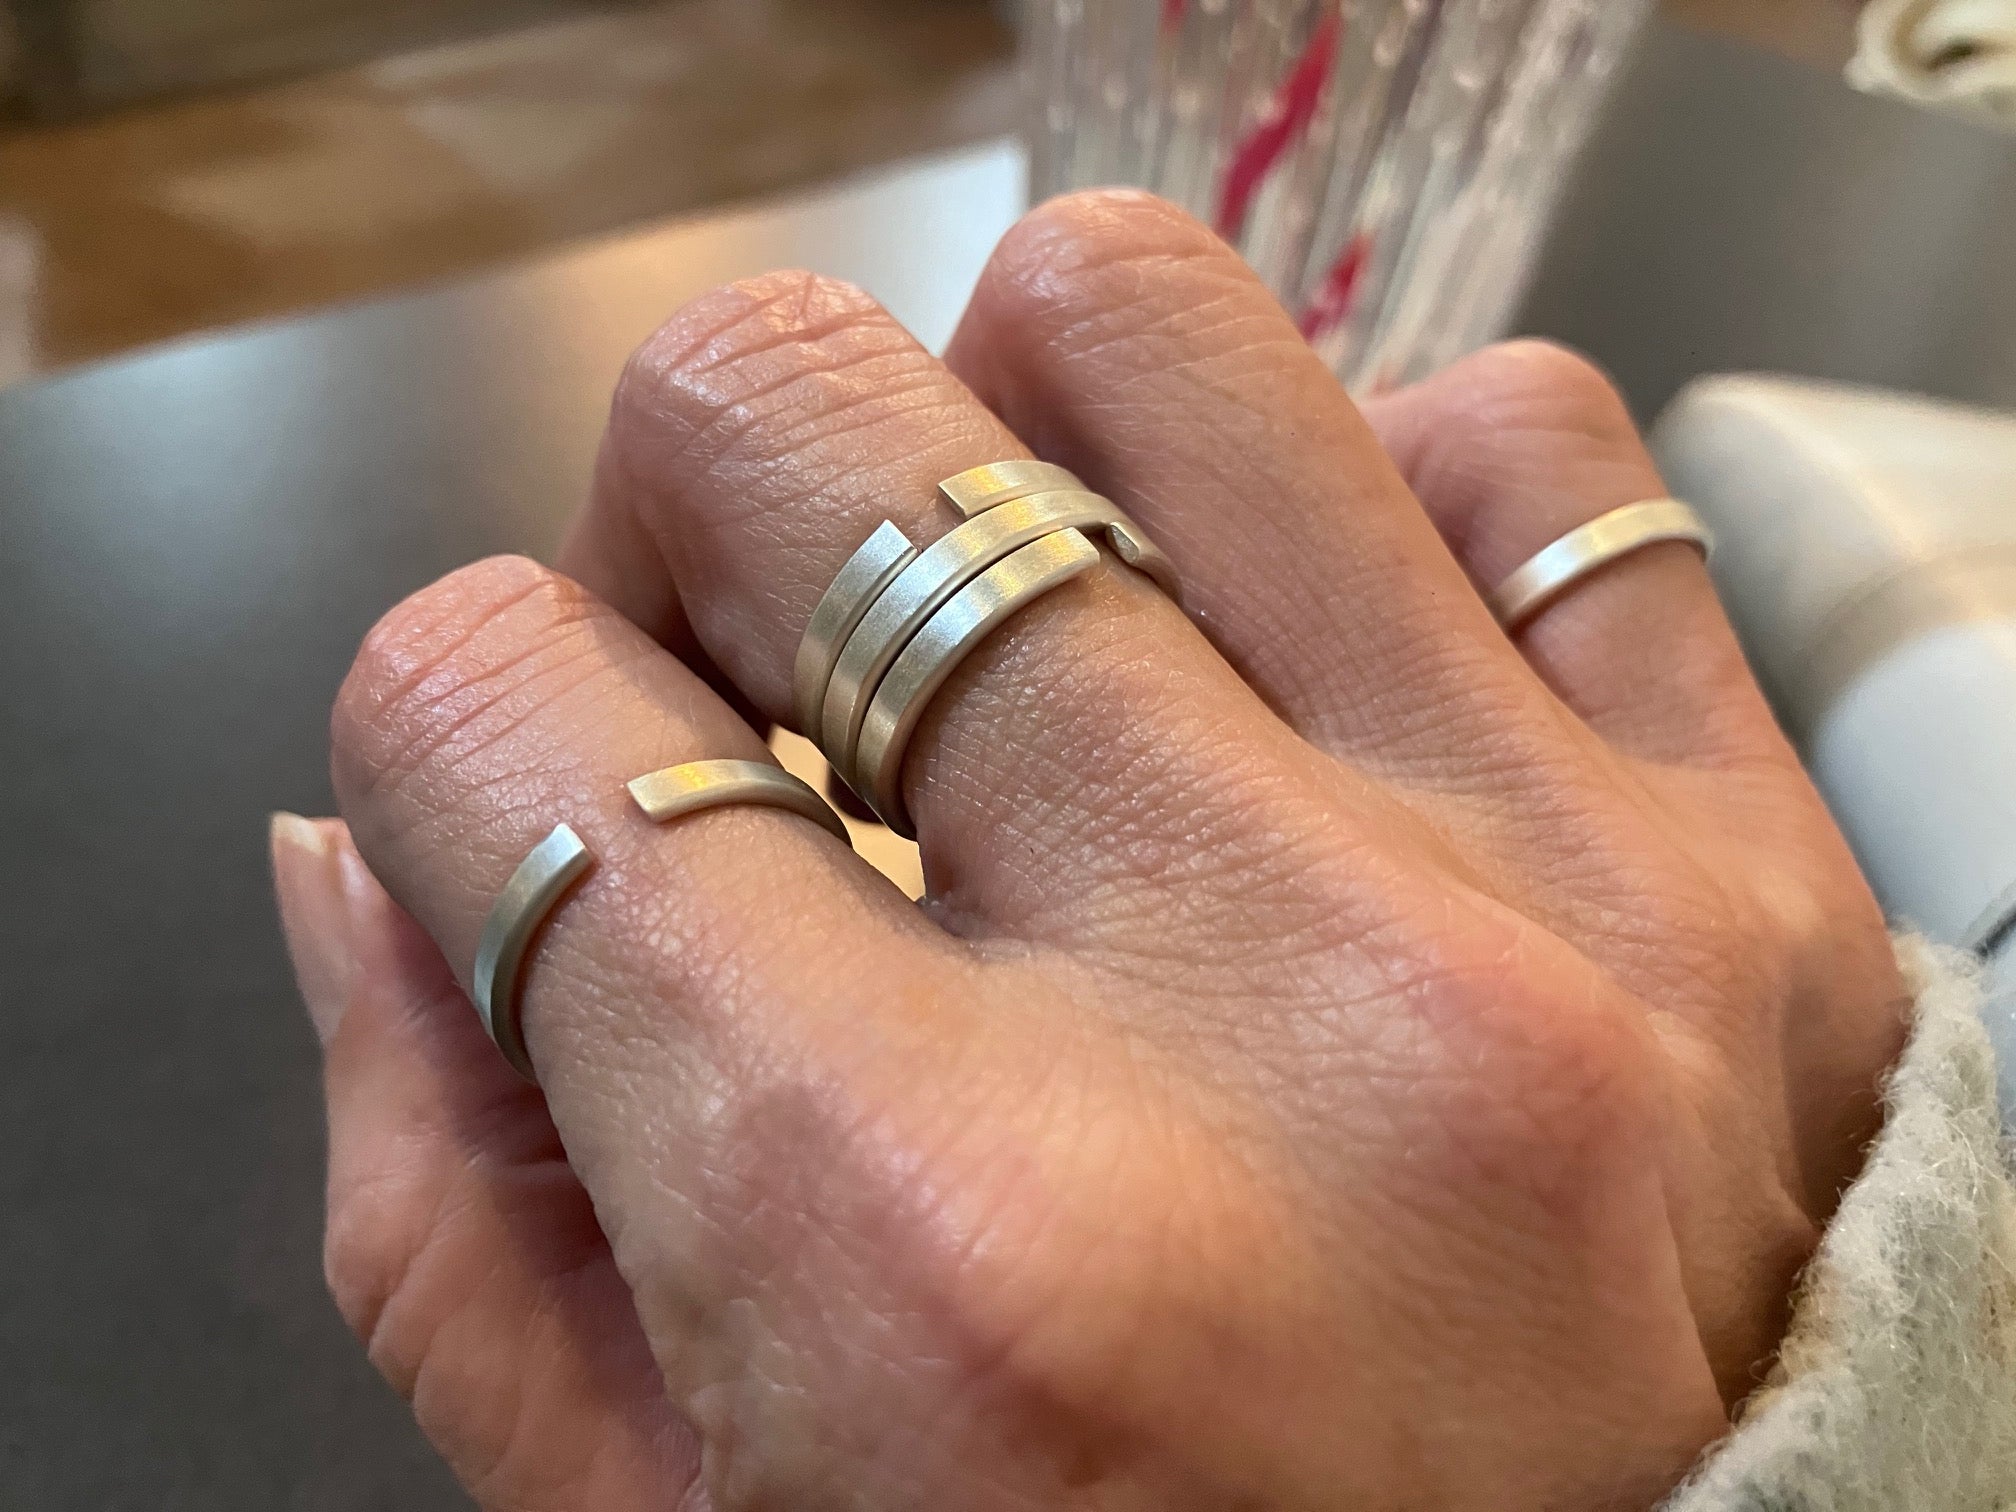 Adjustable Freely Sterling Silver925 Ring with Matte Finish For Men & Women  艶消し・シルバー ユニセックス 調節可能 フリーリング